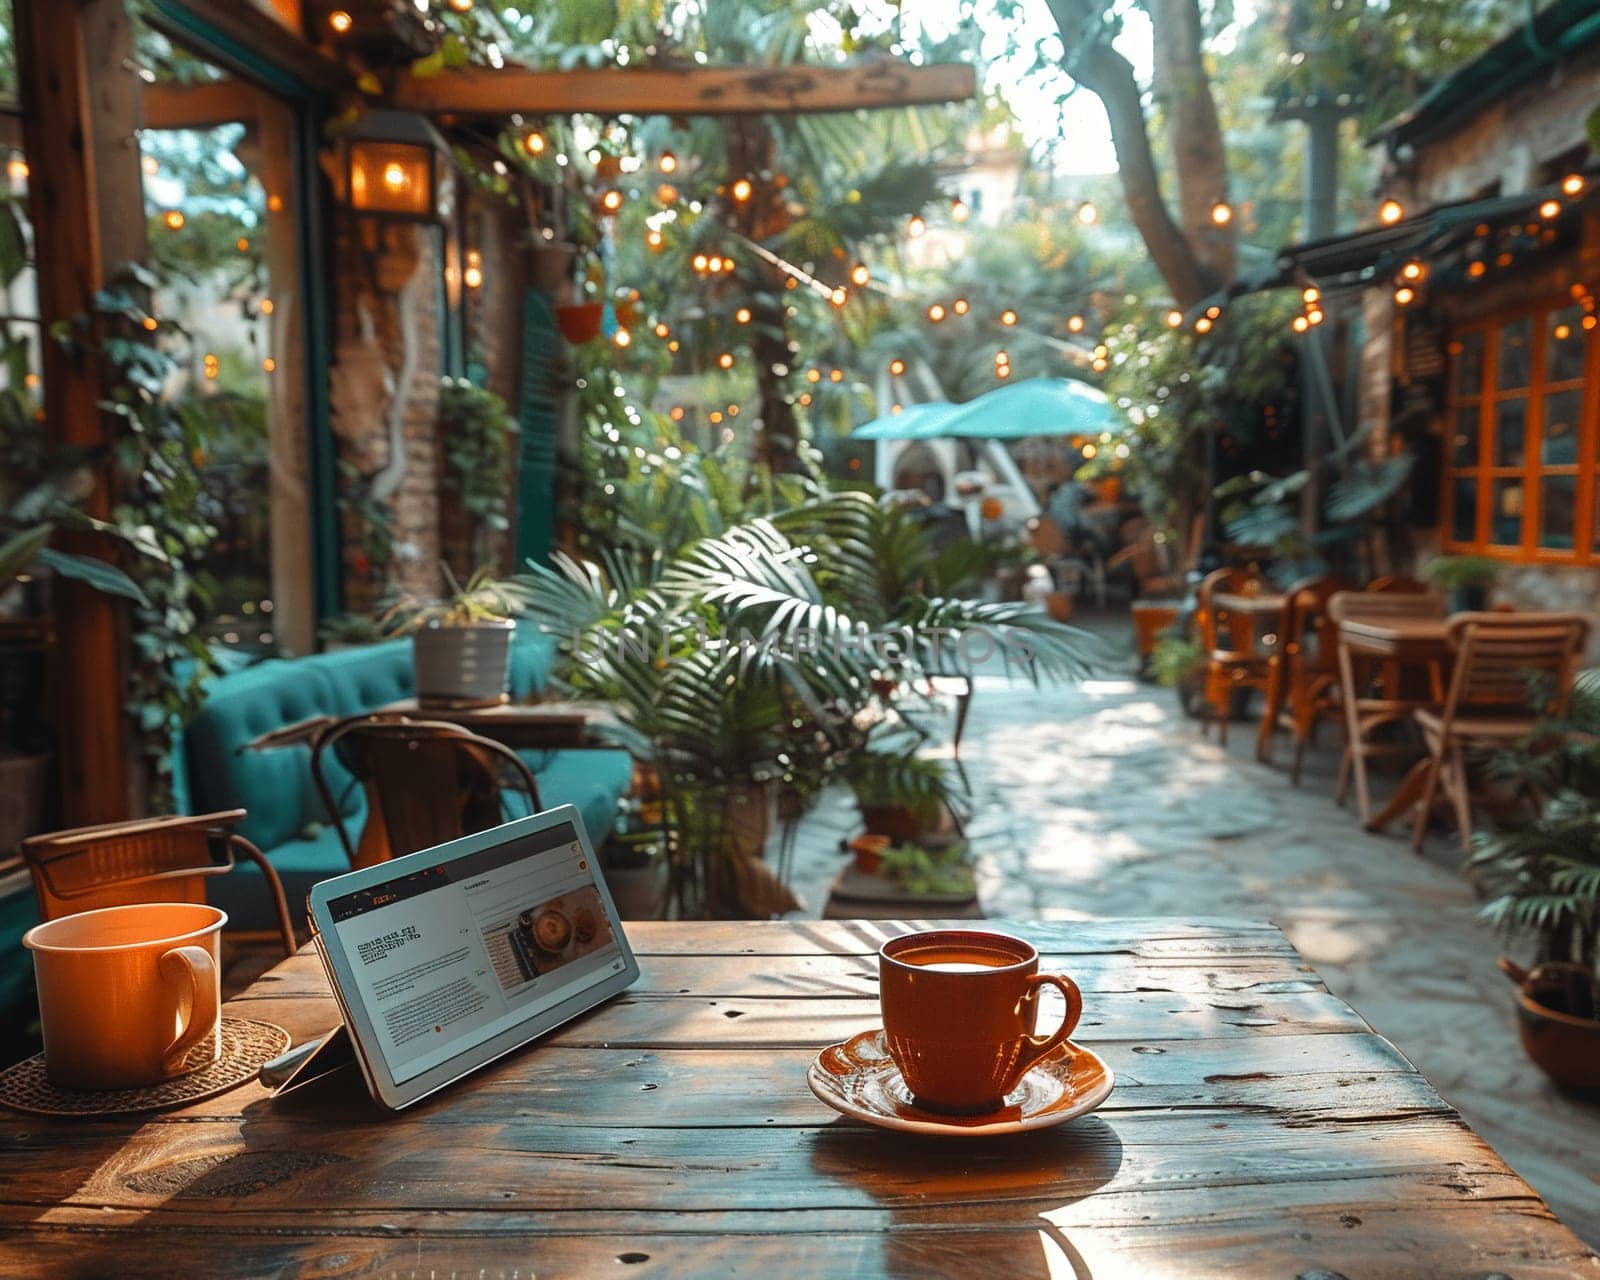 Digital Nomad Crafts Blog Posts in Exotic Cafe Setting by Benzoix